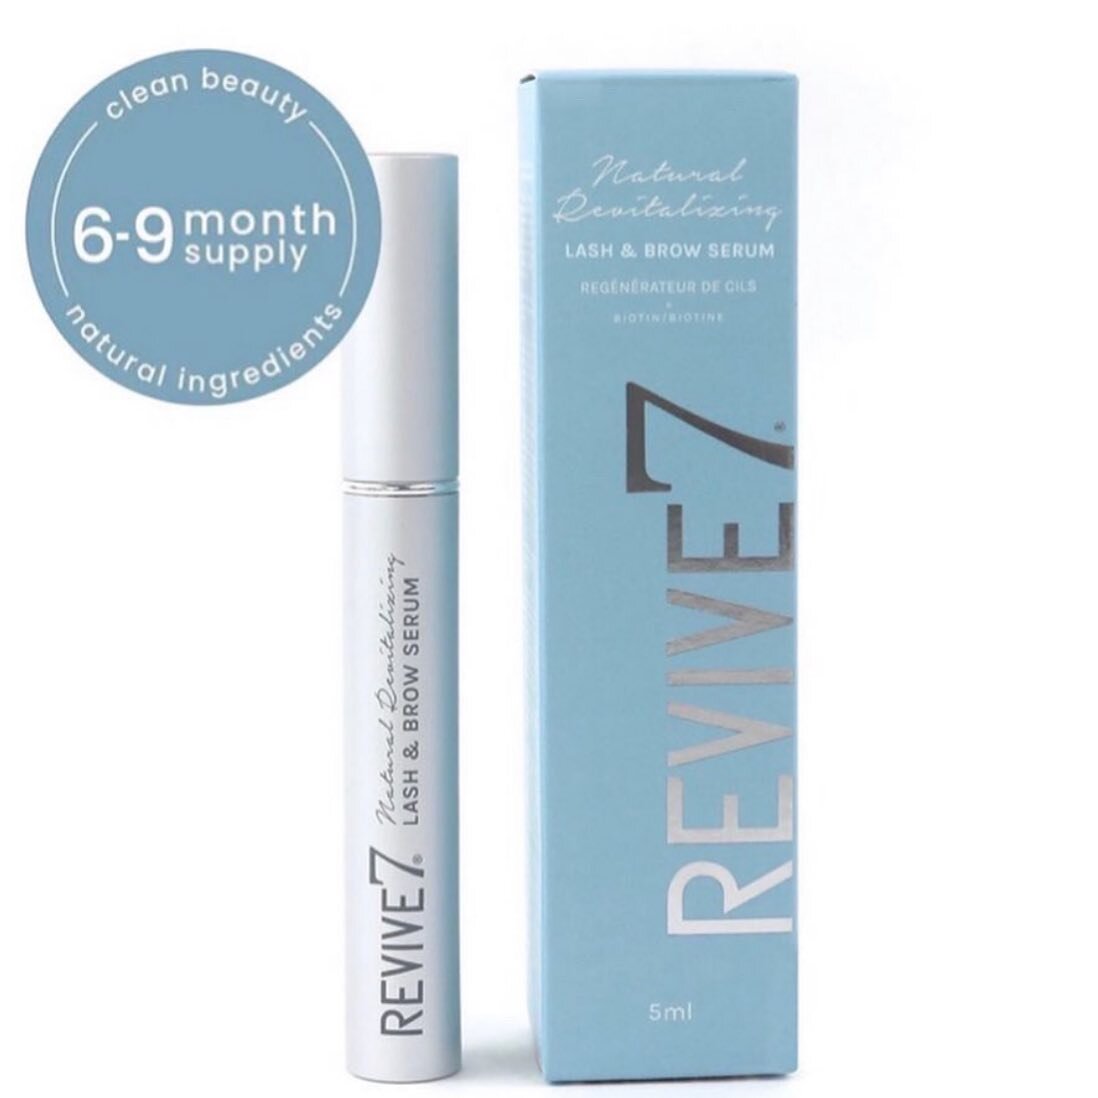 Revive7 is BACK in STOCK at Brows By Cher text me to get yours! 💁🏼&zwj;♀️ 604.551.9054 XO
.
.
#revive7 #browsbycher #browsbychervancity #supportlocal #shopsmall #femaleentrepreneur